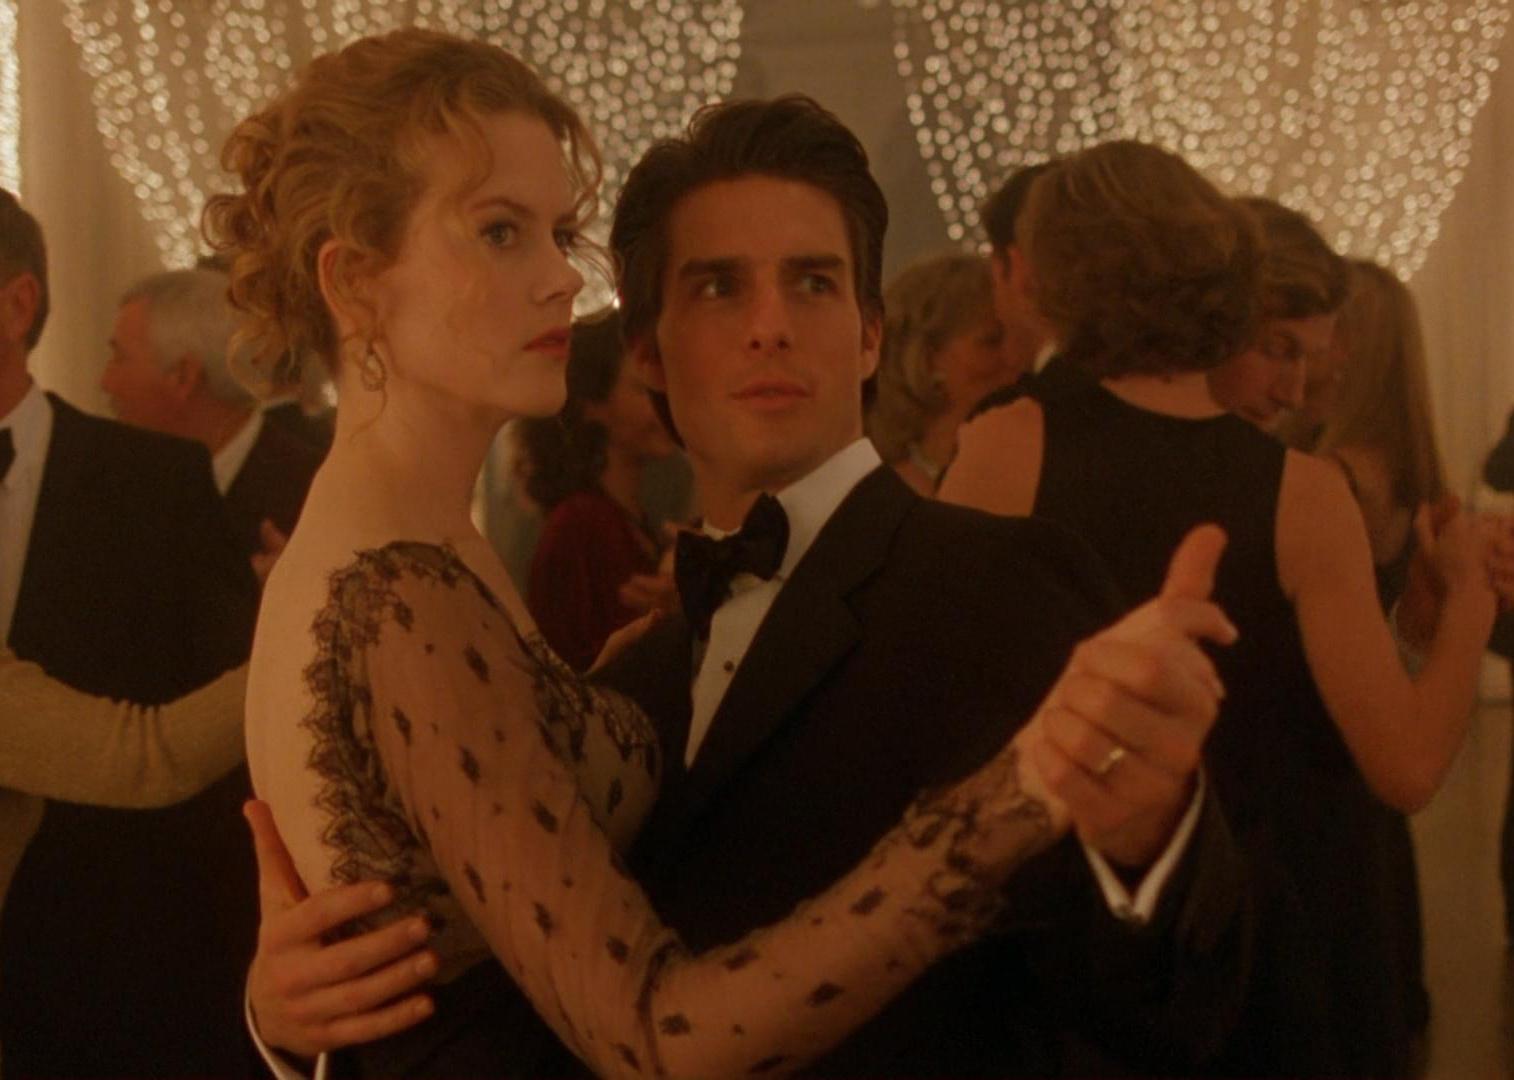 Tom Cruise and Nicole Kidman dressed up and dancing in a ballroom full of lights.